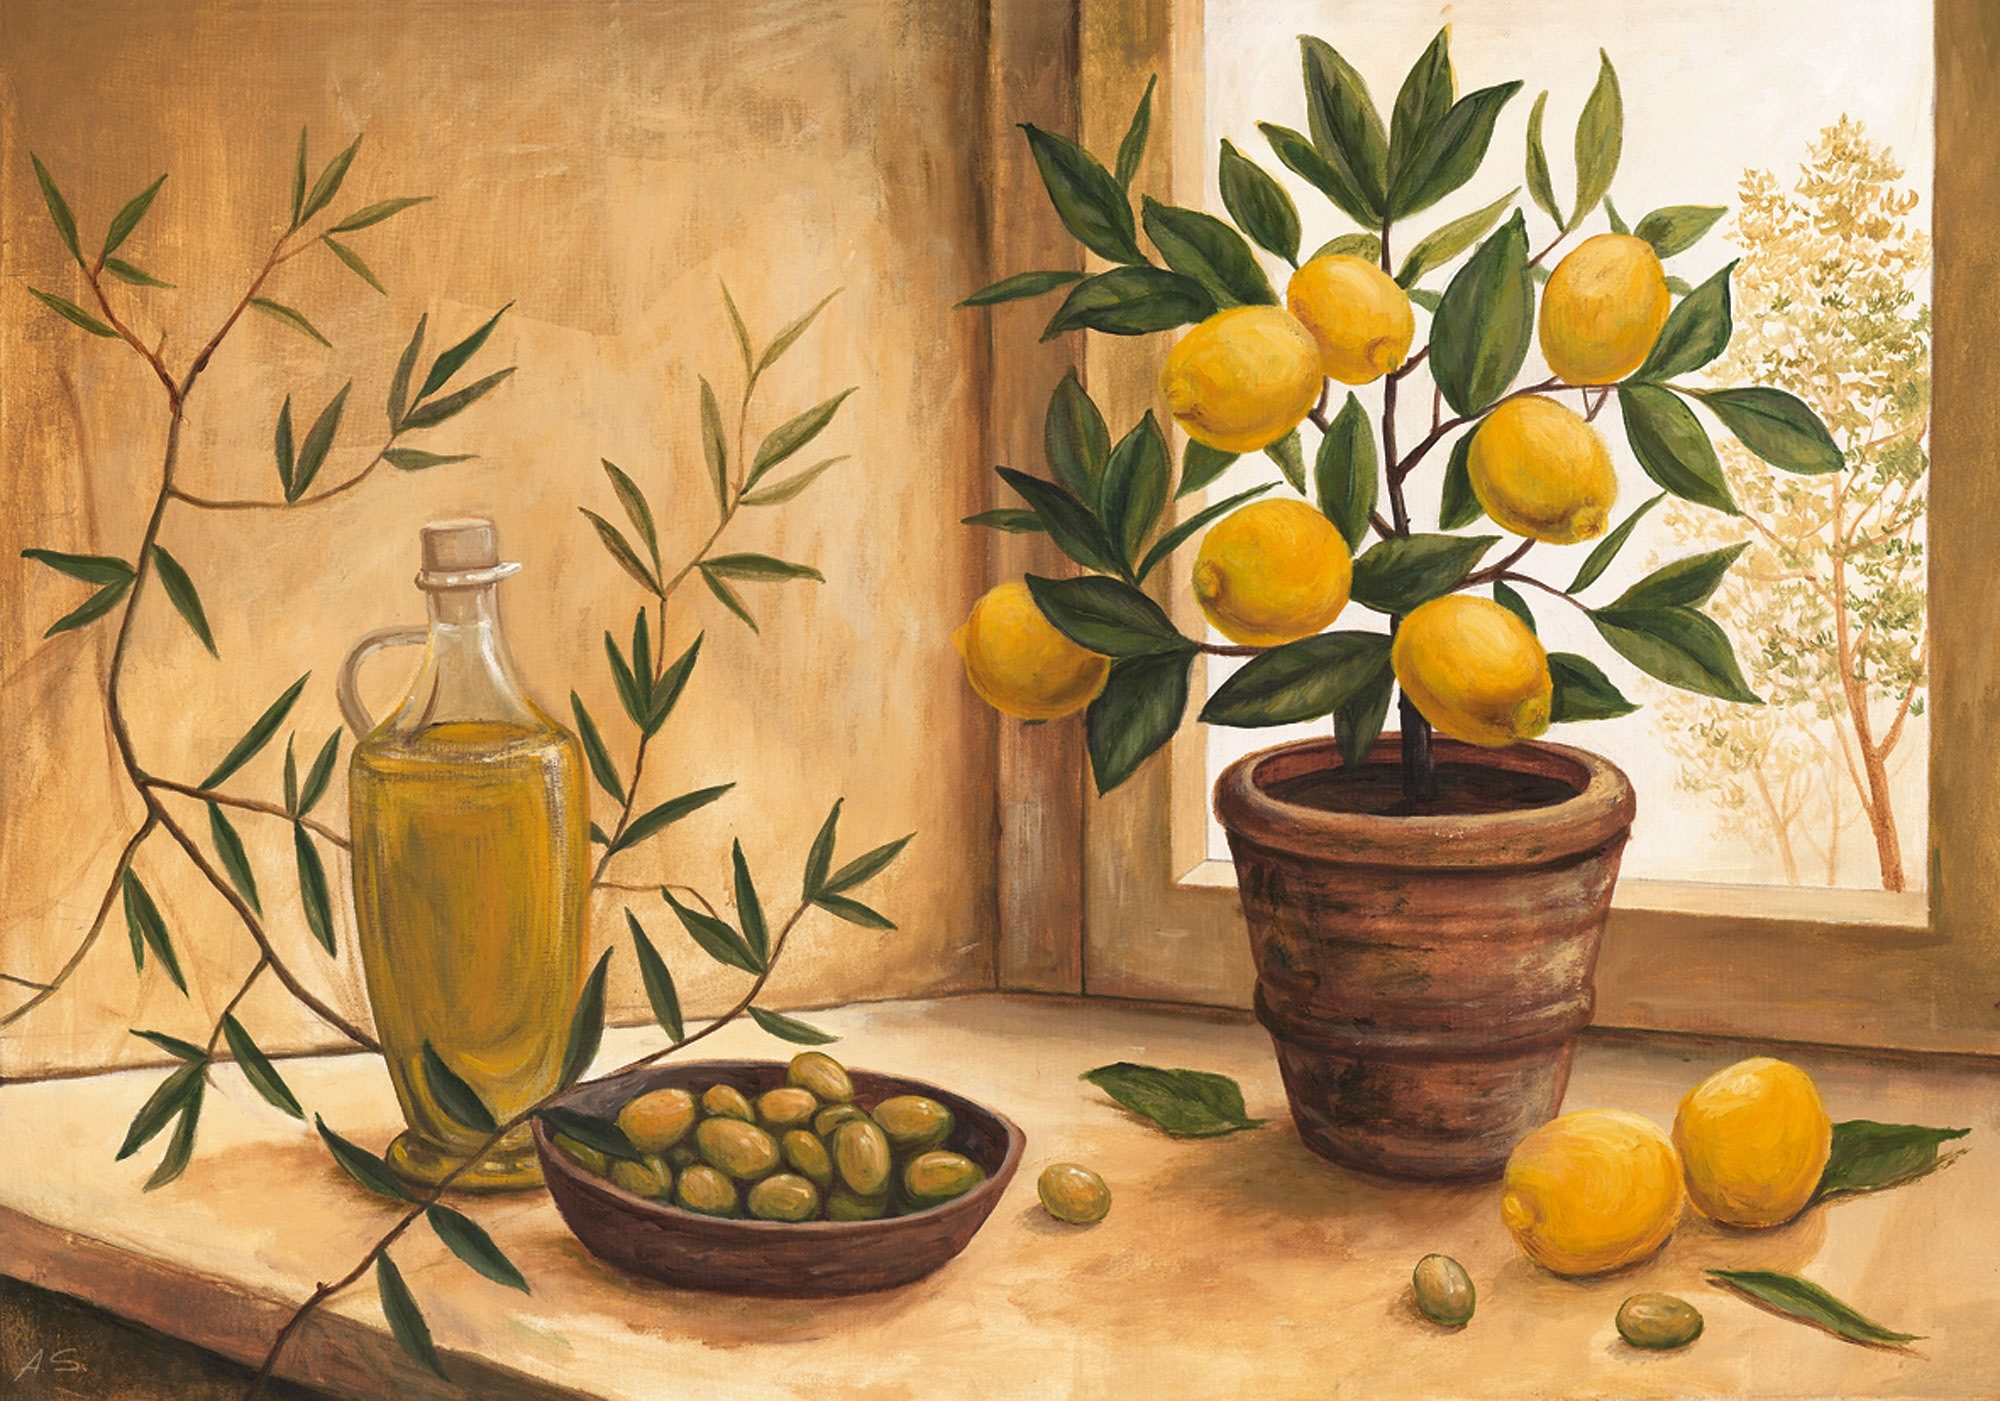 HOME AFFAIRE artprint A. S.: Olive and lime, 99x69 cm